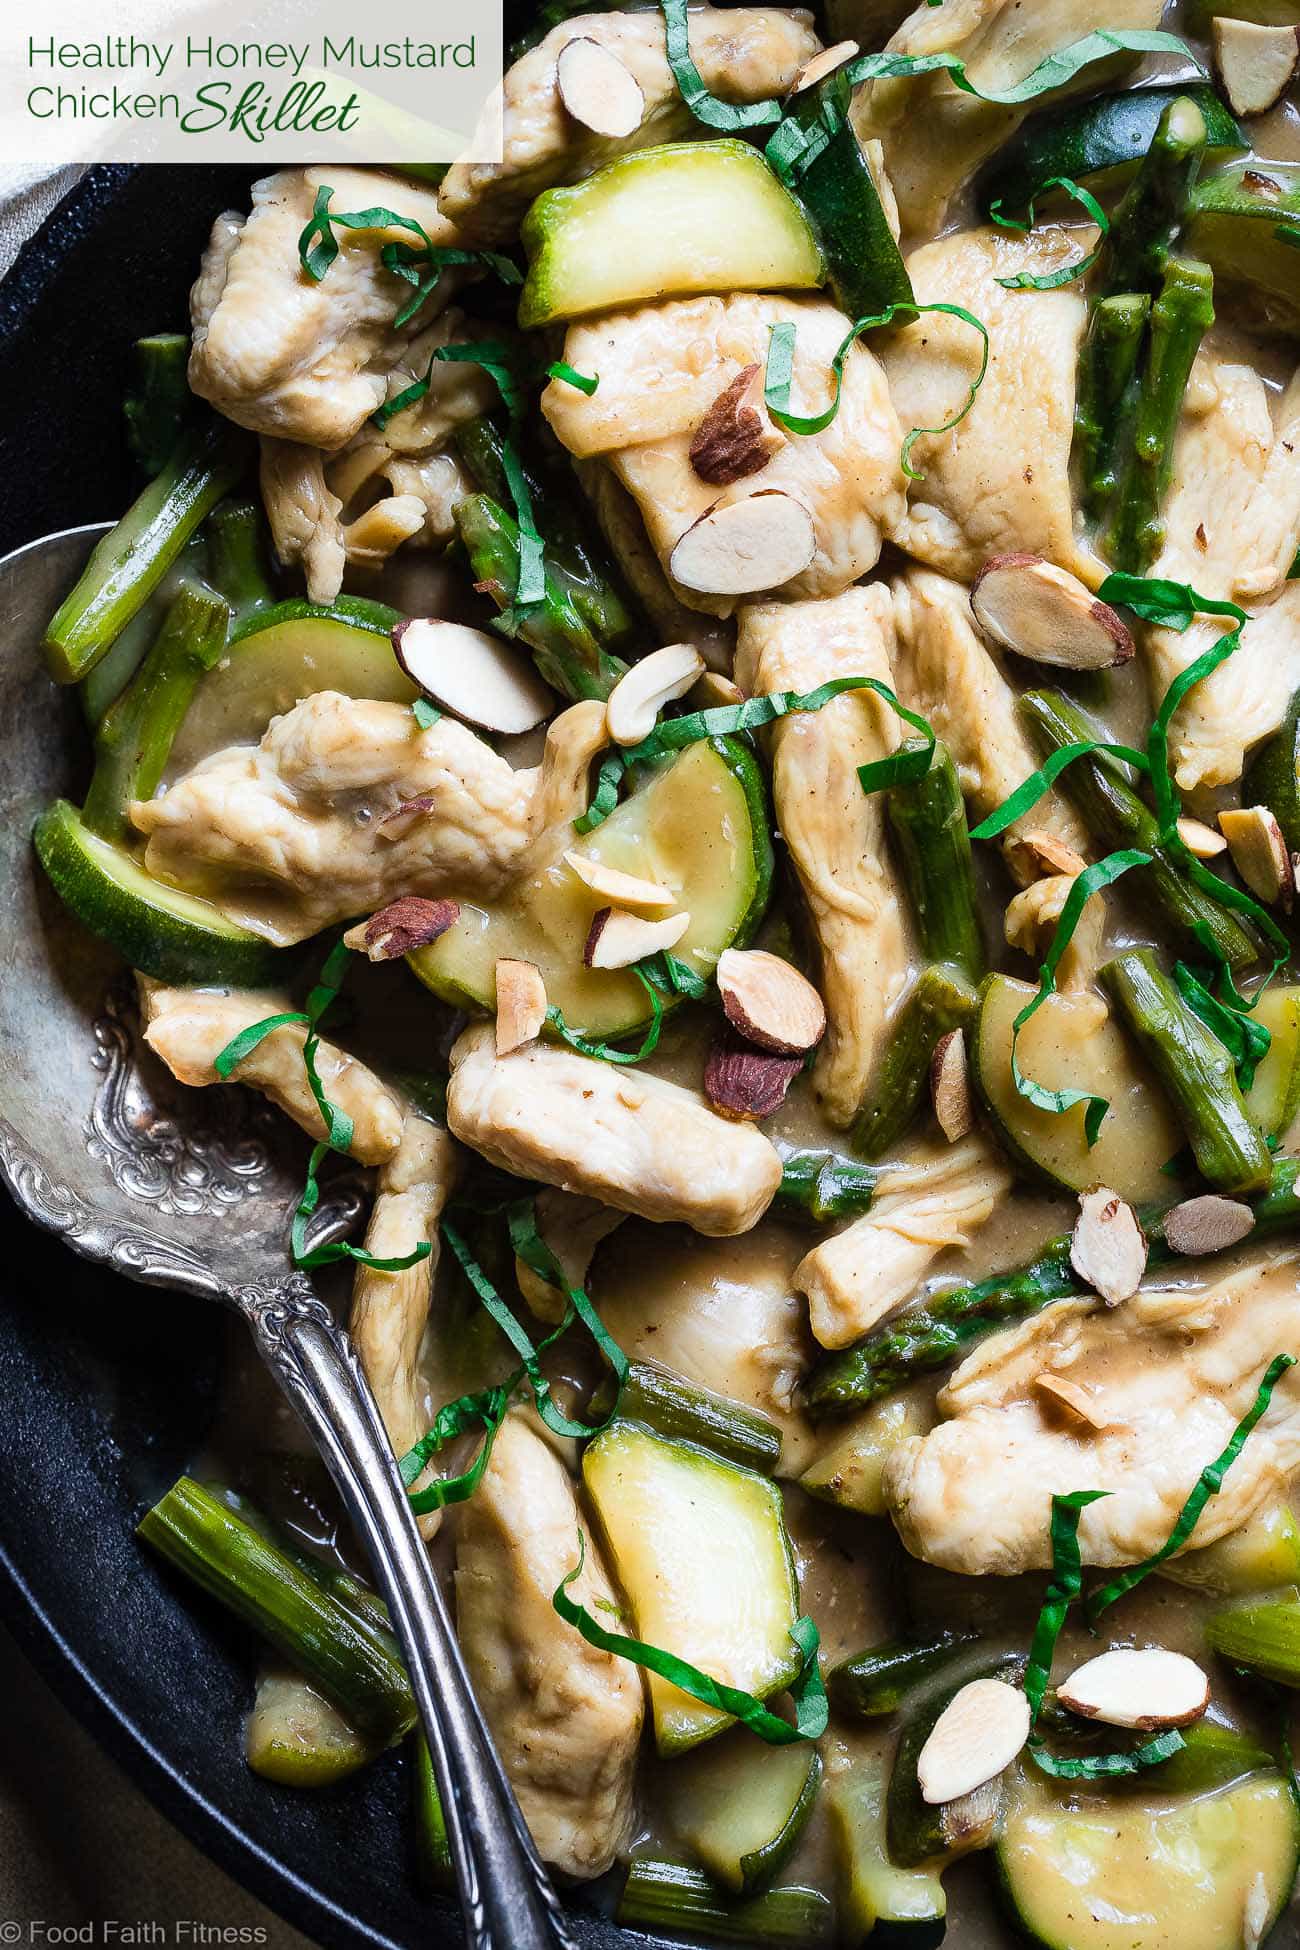 Easy Honey Mustard Chicken Skillet -  This paleo friendly chicken skillet is quick, easy and healthy! It's kid-friendly, 30 minute meal that makes great leftovers and perfect for busy weeknights! | Foodfaithfitness.com | @FoodFaithFit